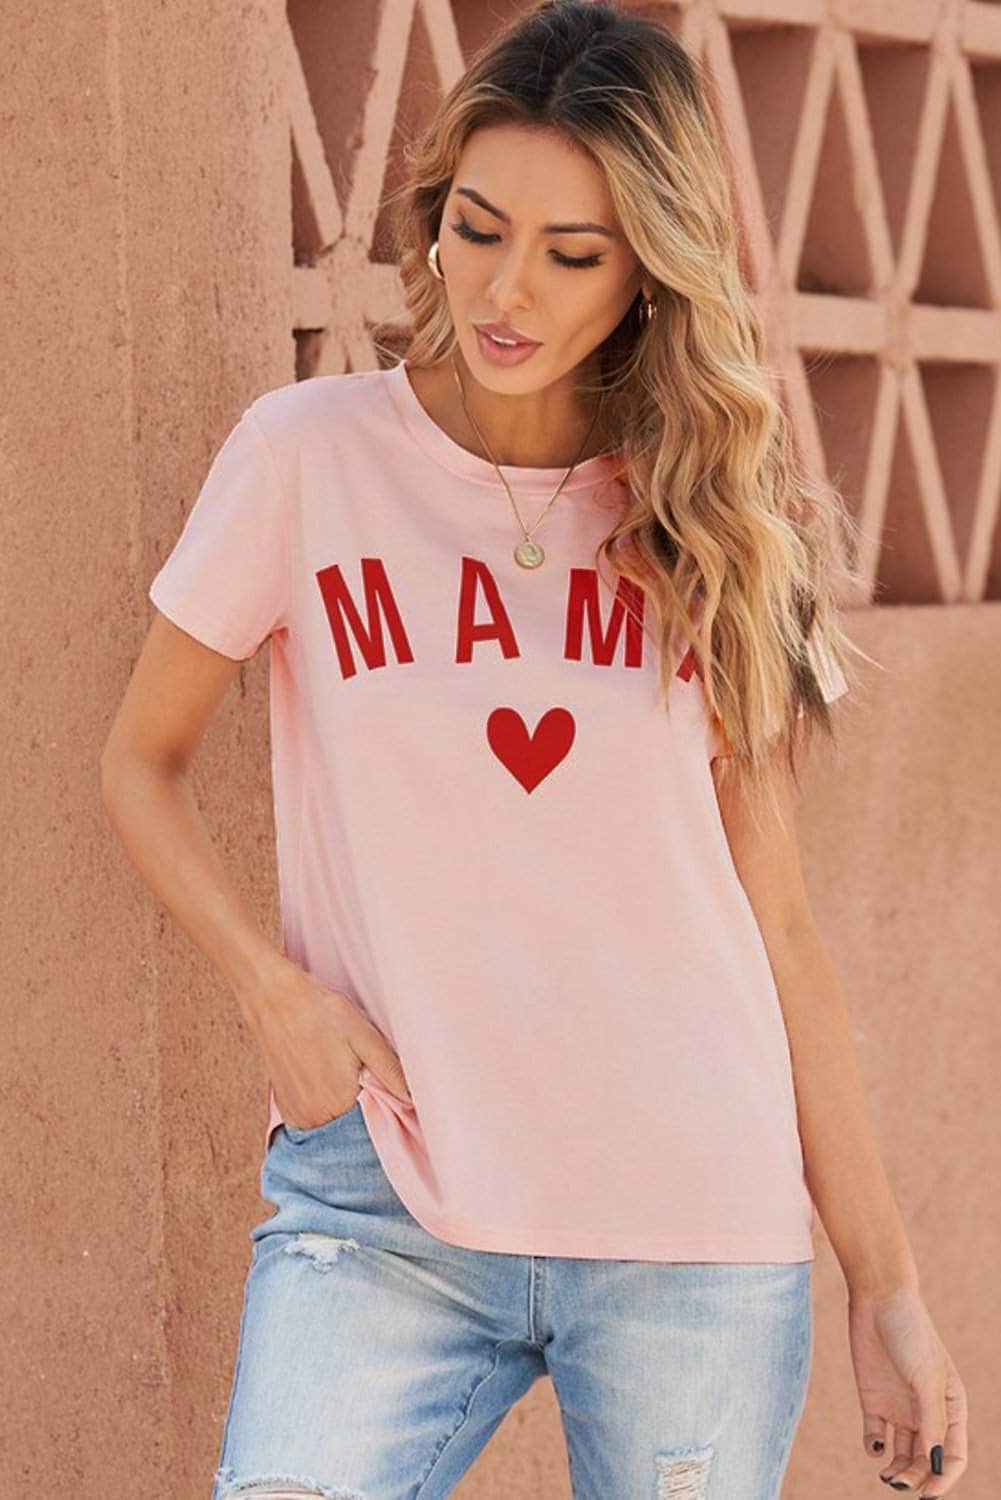 MAMA Heart Graphic Tee BLUE ZONE PLANET